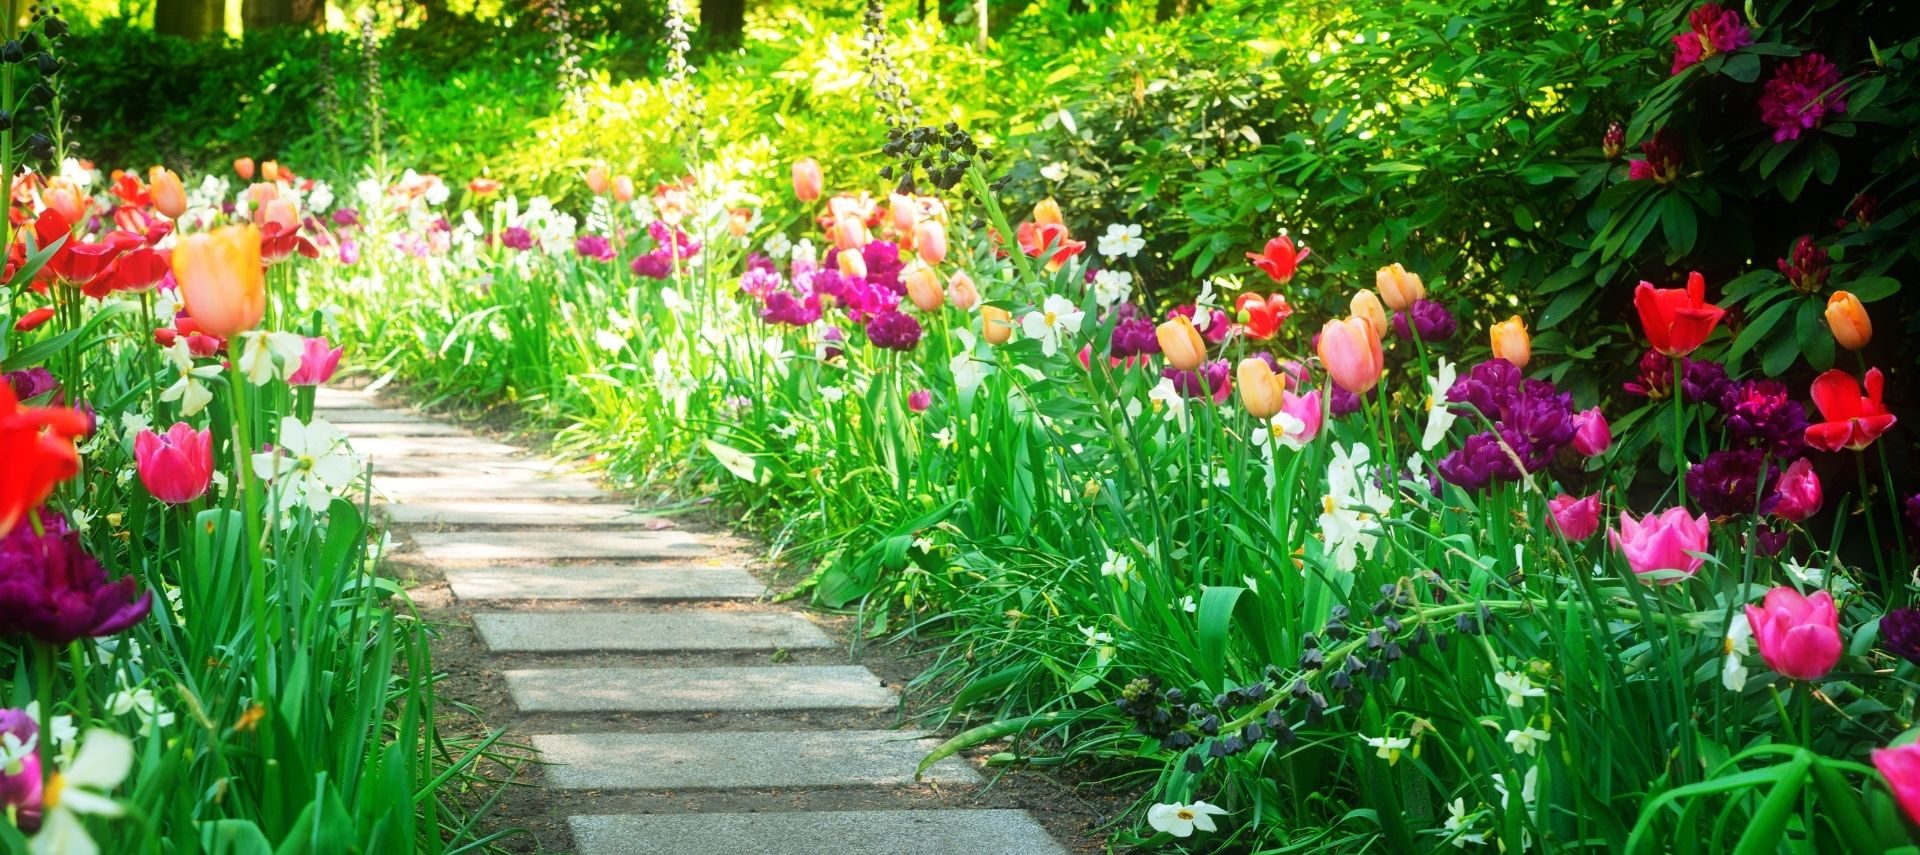 Curved walking path flanked by colorful tulips and lush greenery